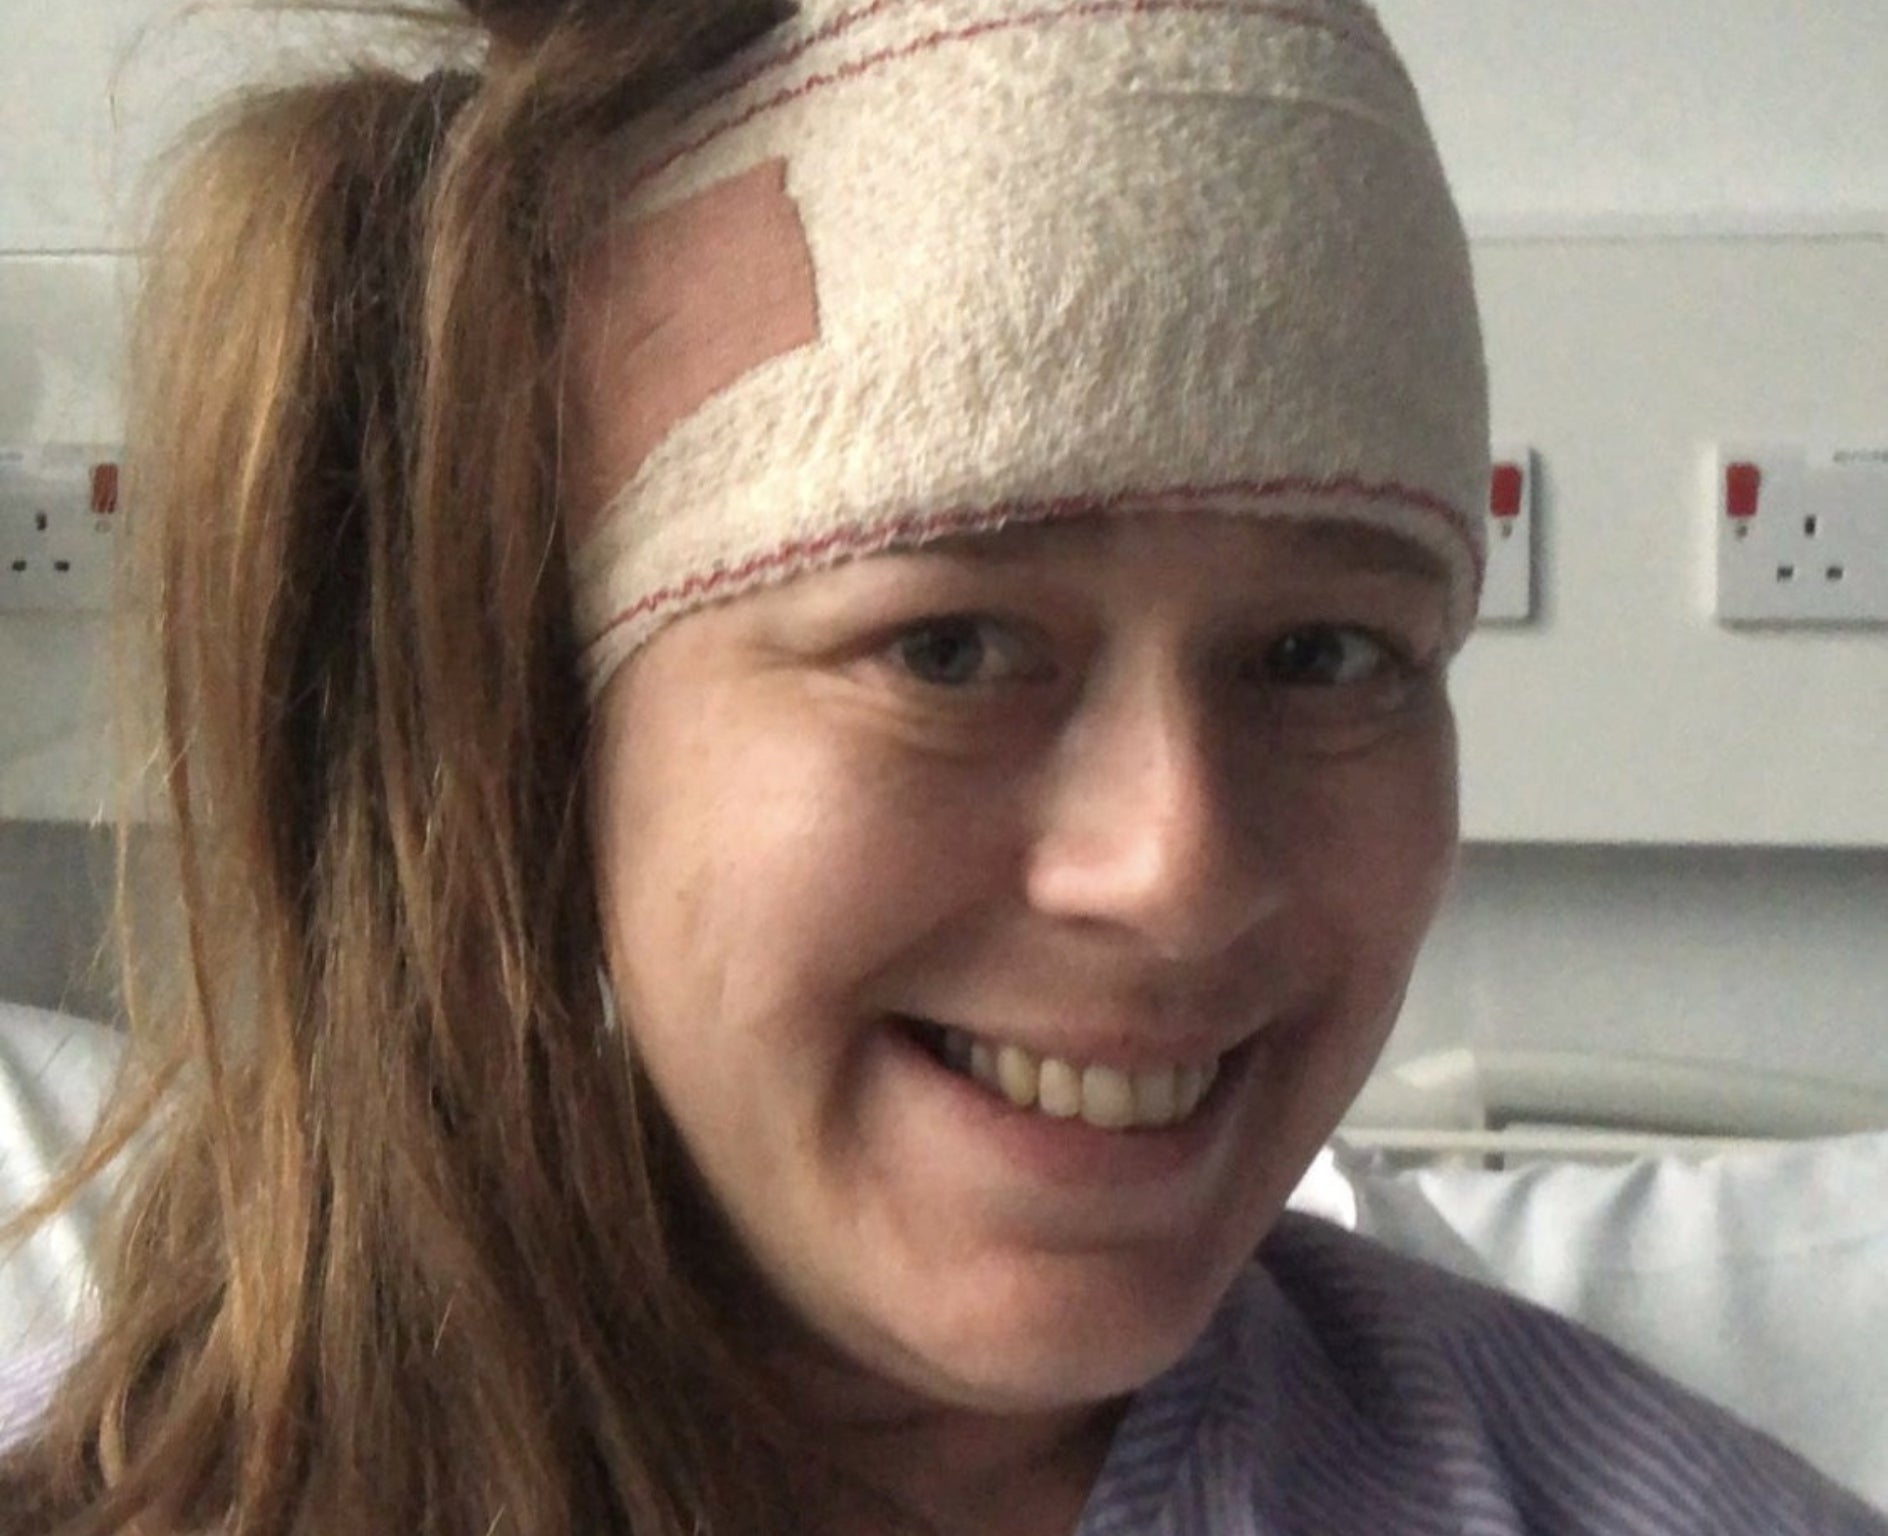 Kaylee Crawshaw recently had a brain tumour removed